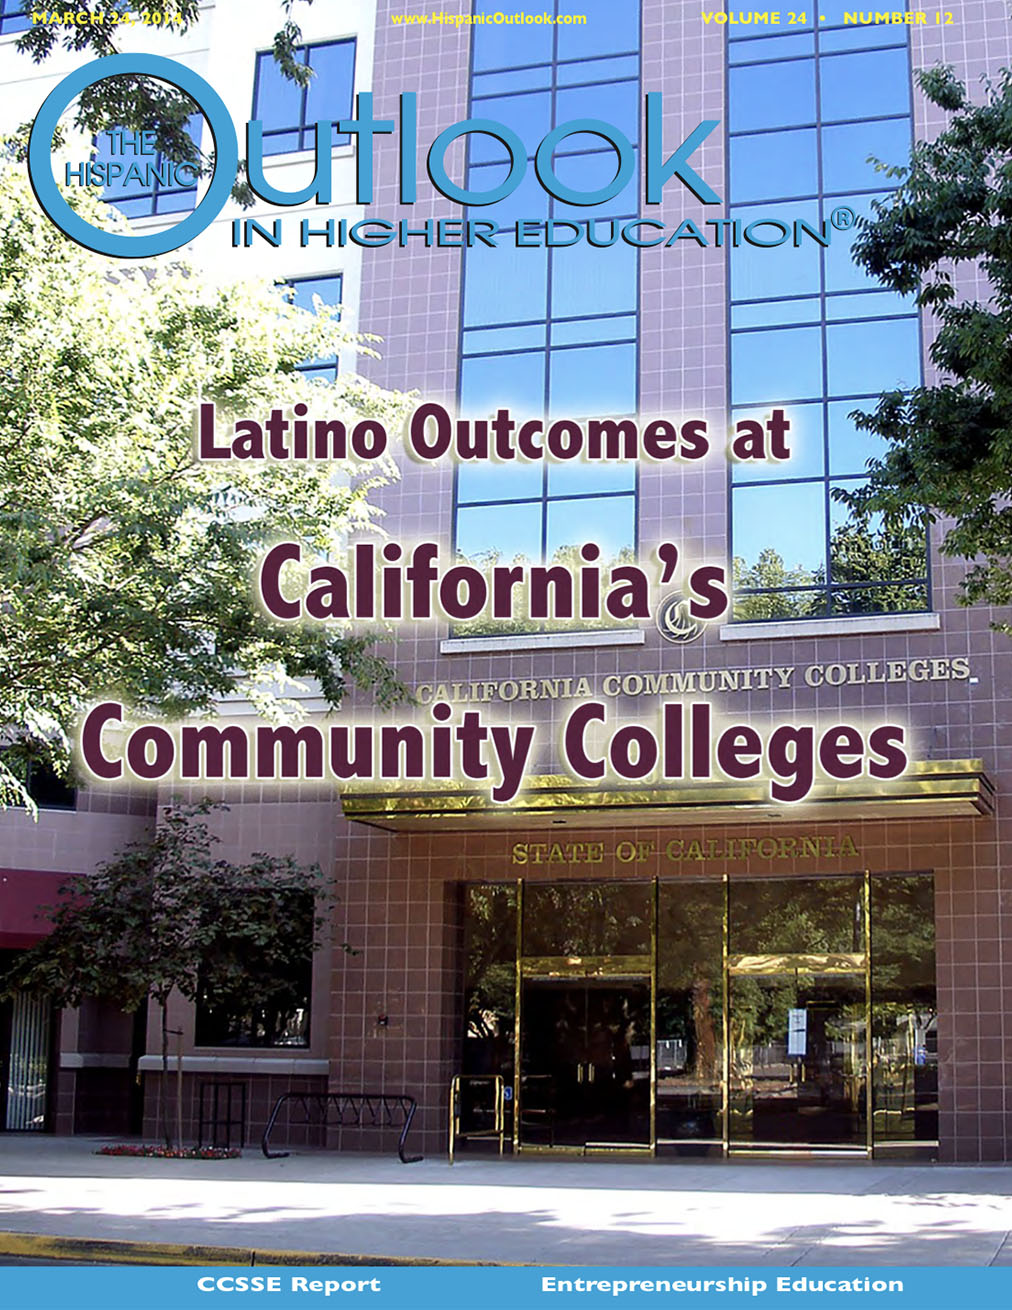 Latino Outcomes at California's Community Colleges